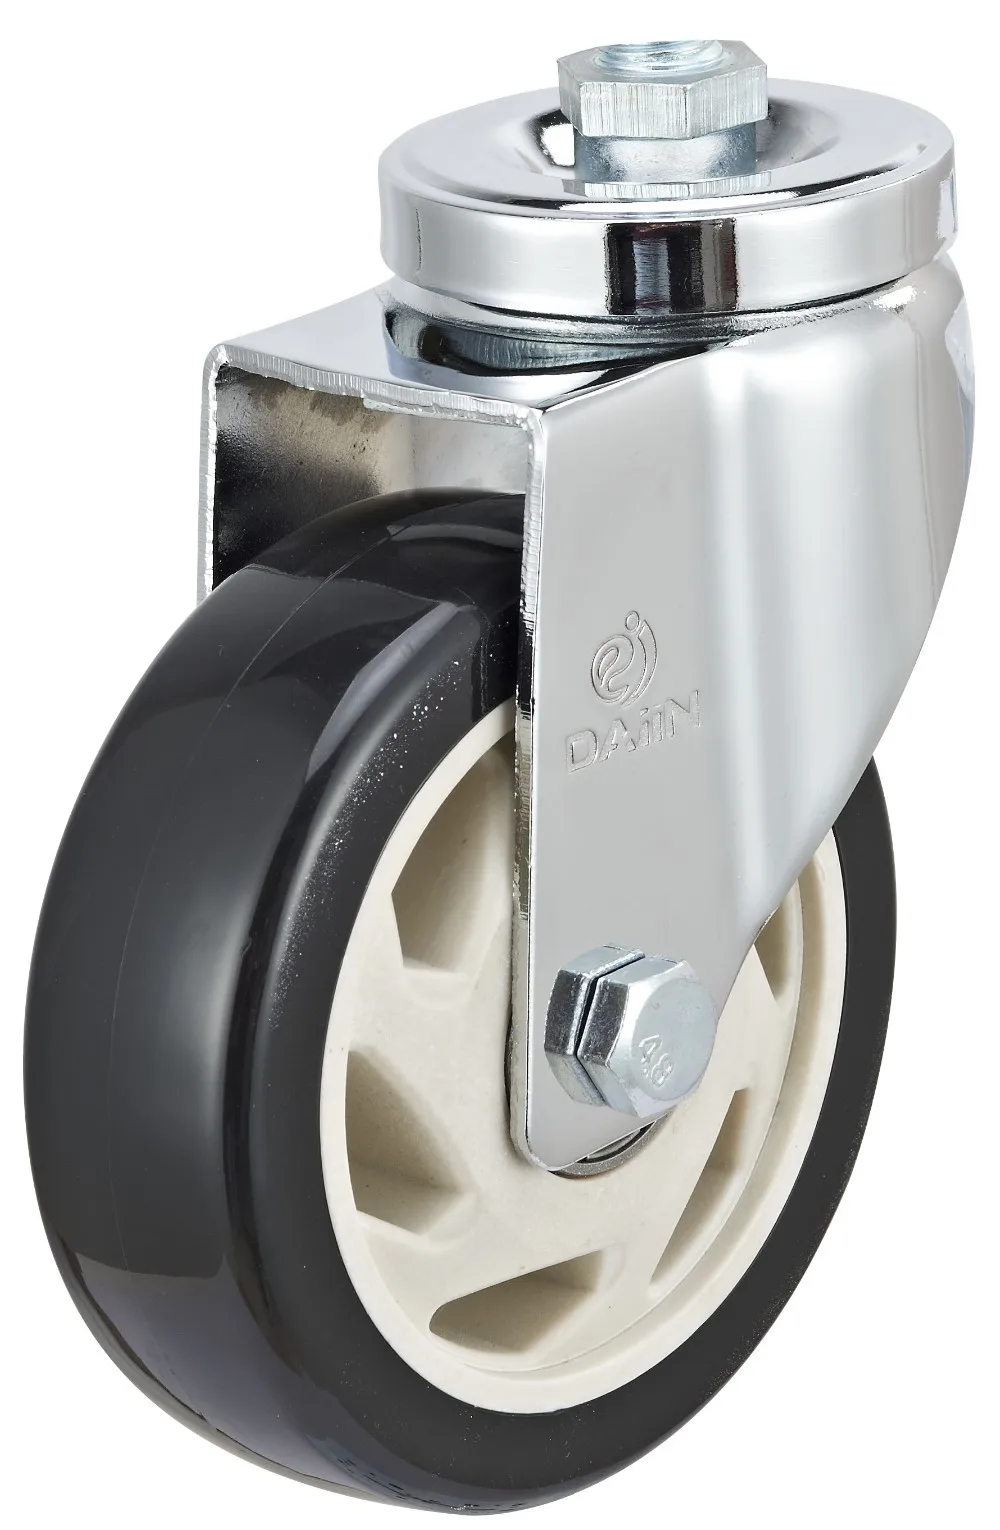 retractable wheel casters for skateboard